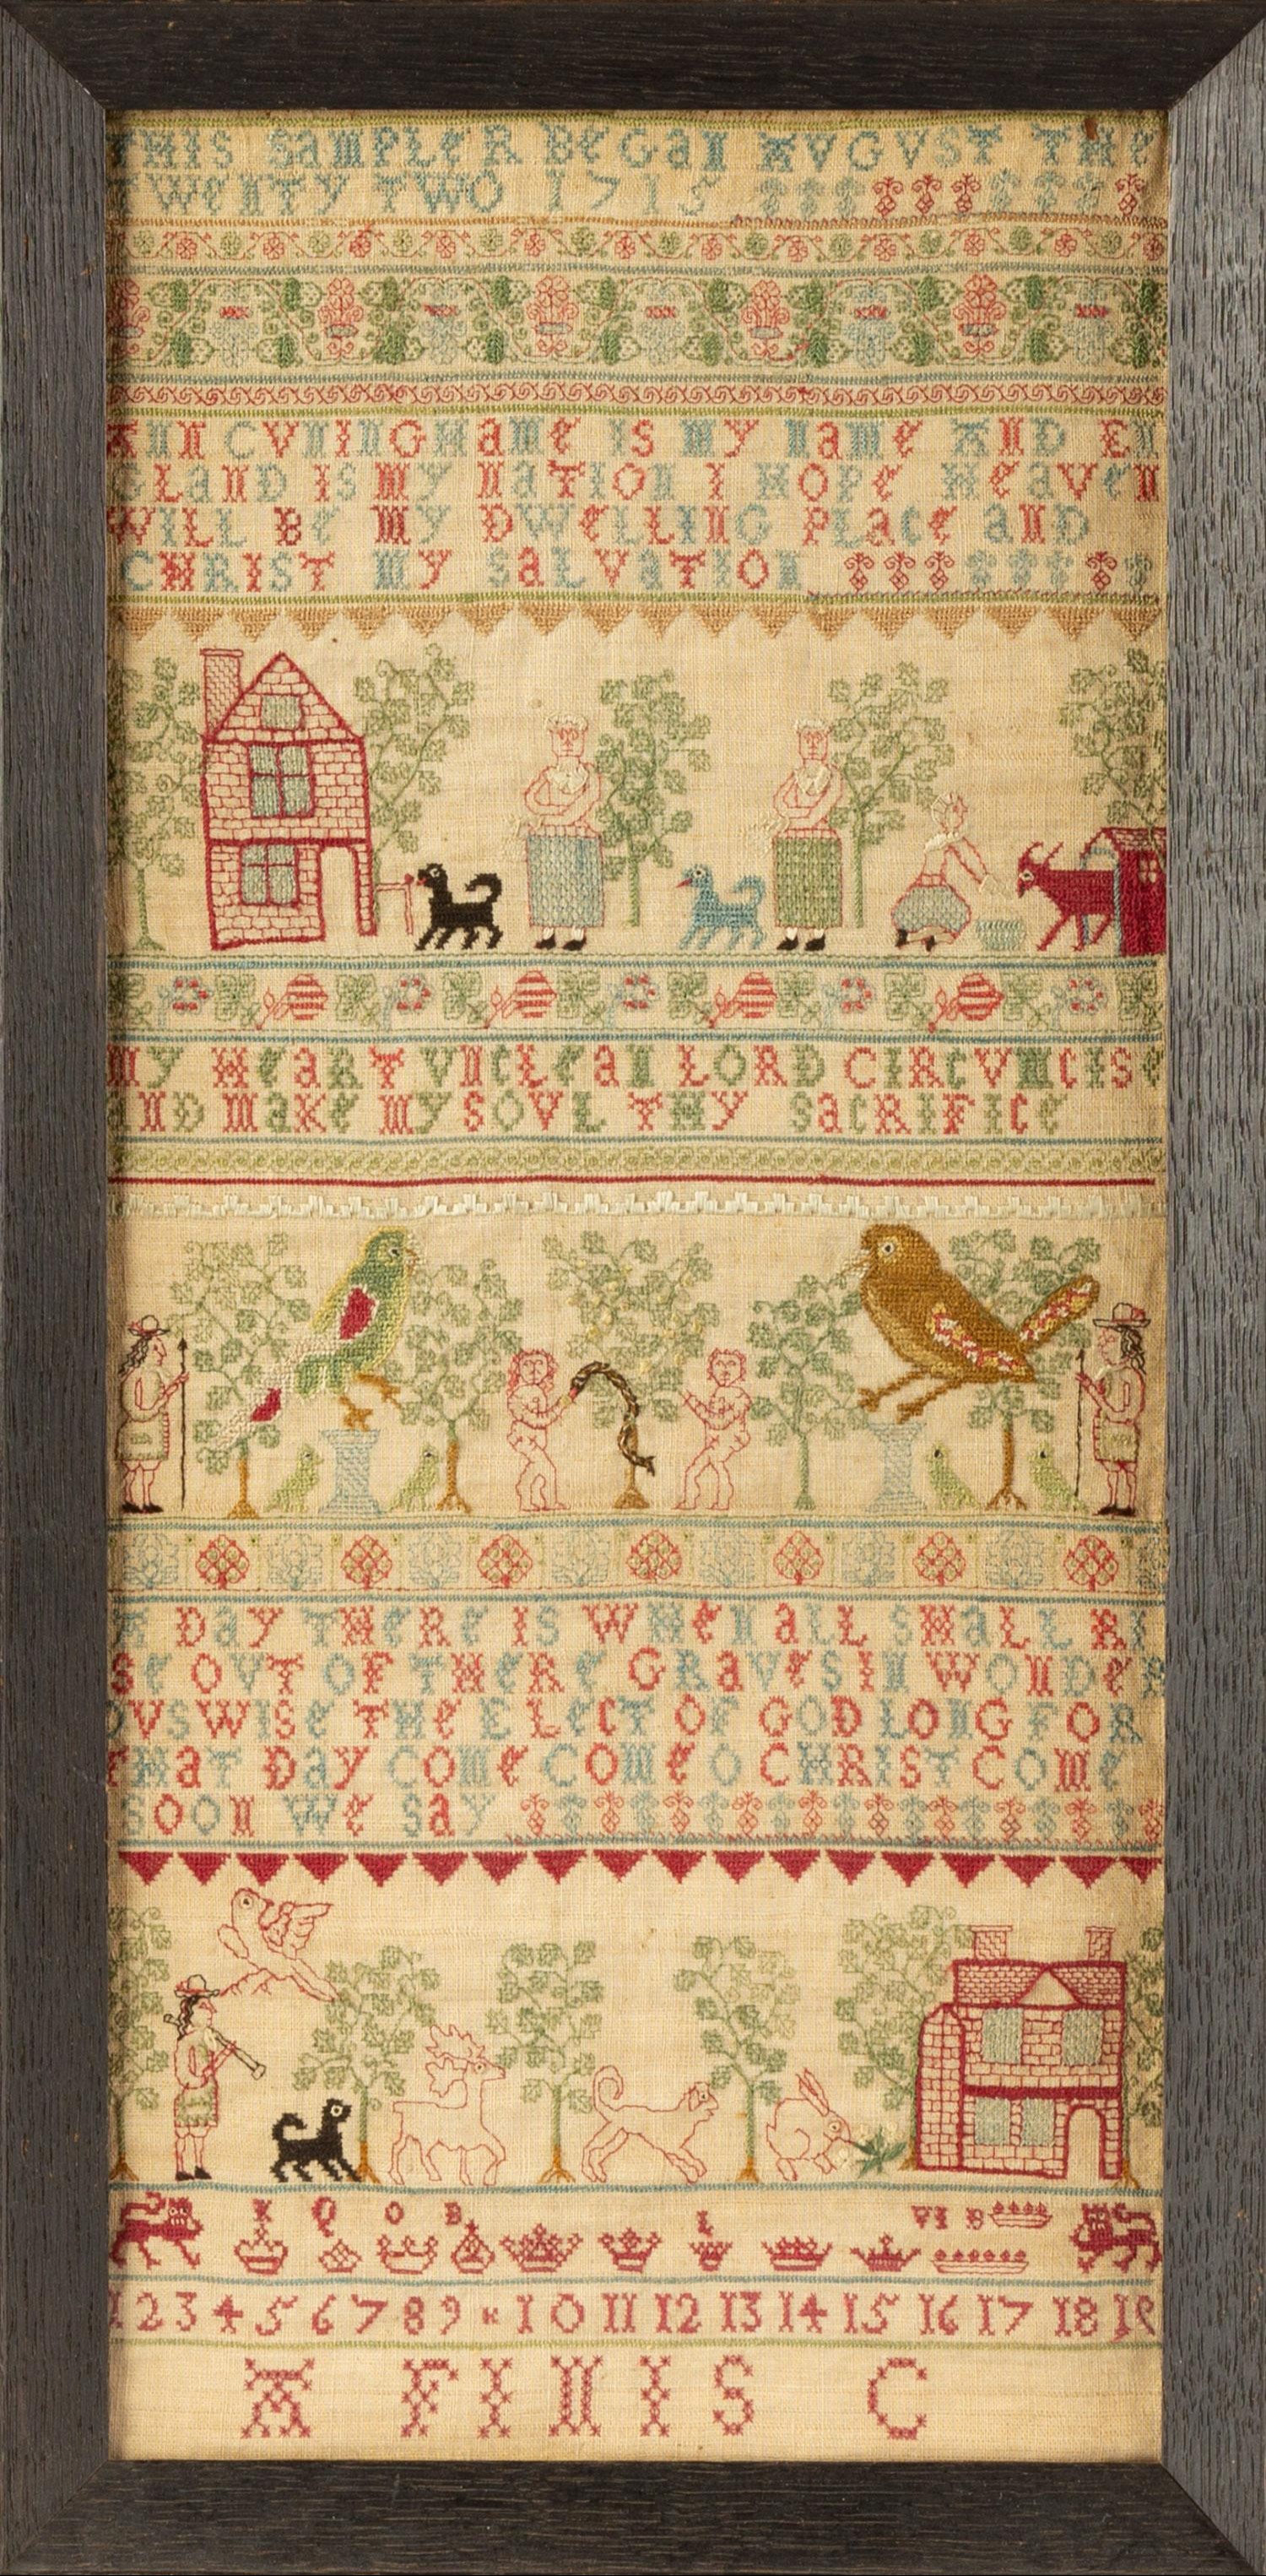 1715 SAMPLER WITH ADAM AND EVE 1716